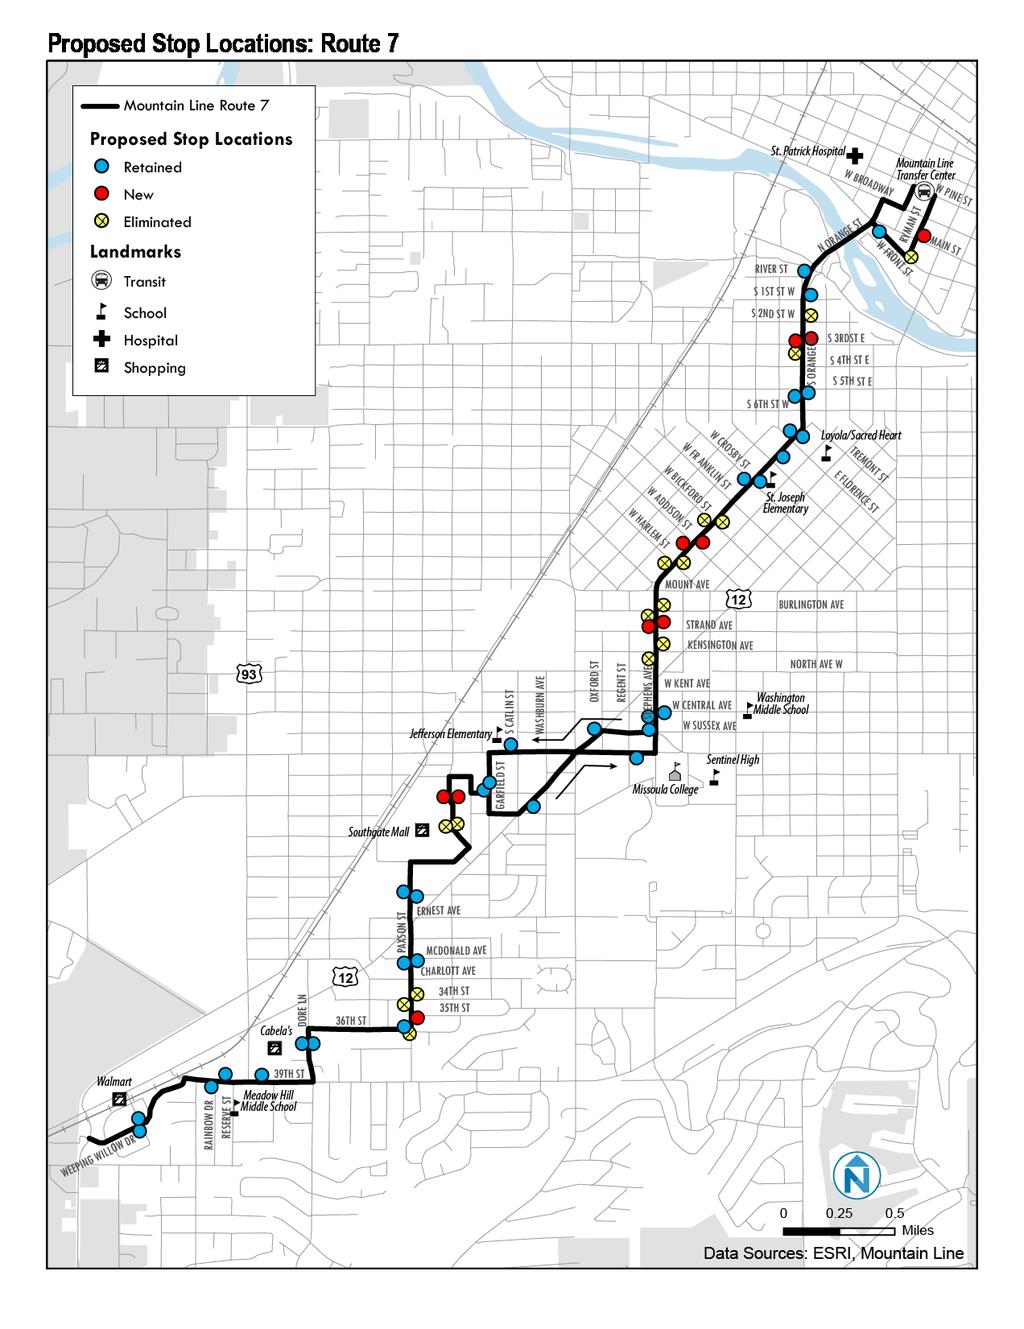 Proposed Stop Changes Route 7